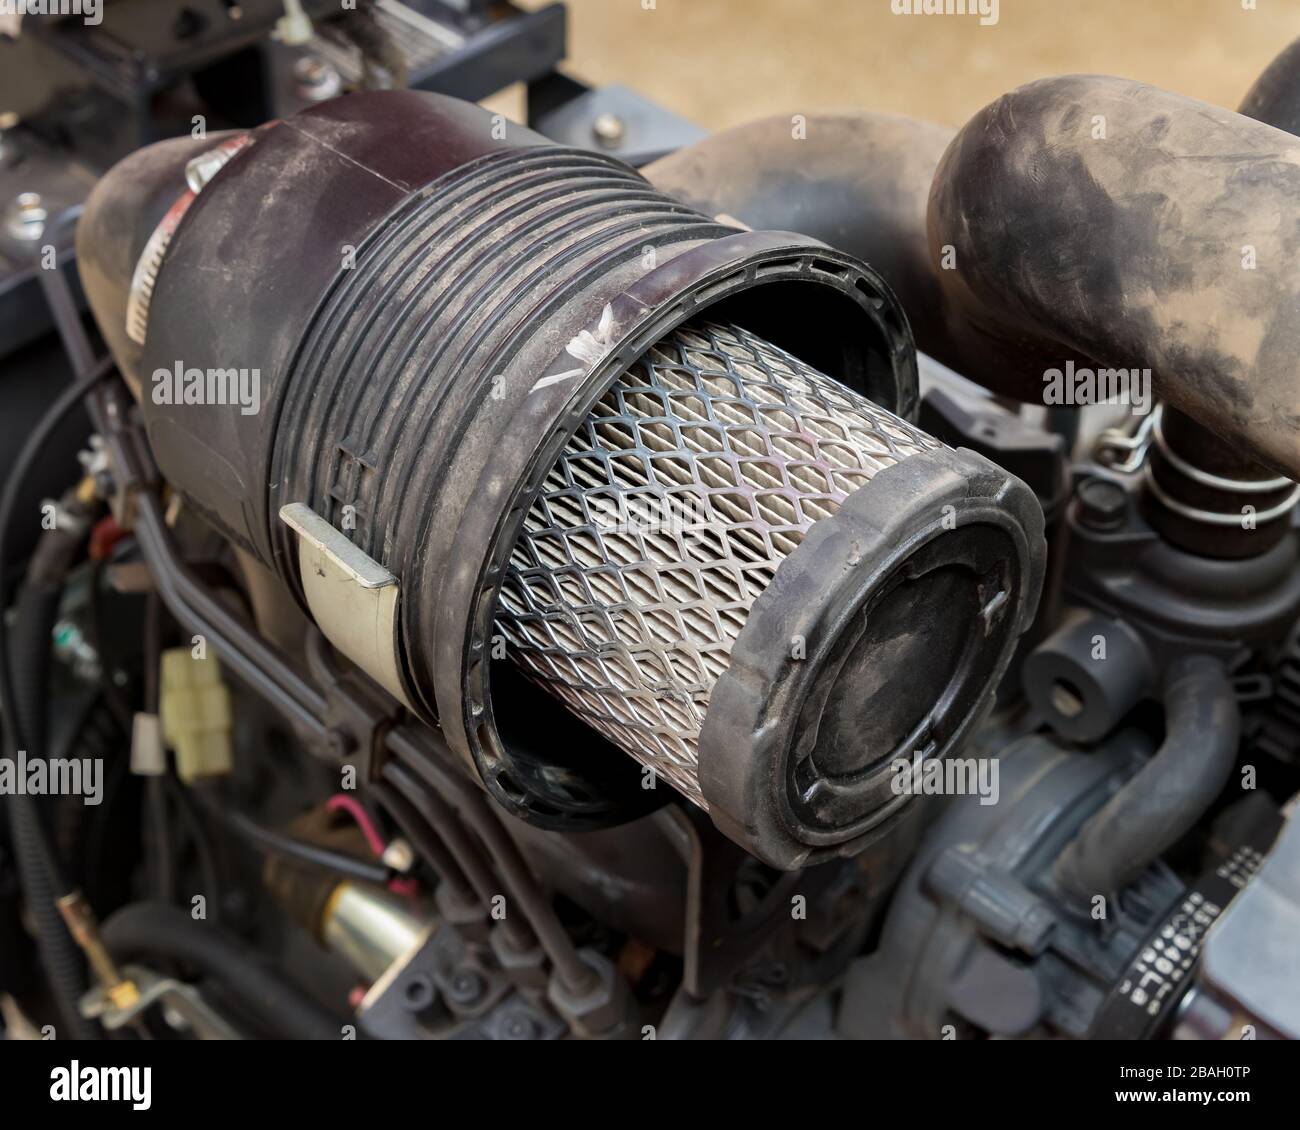 Air filter on diesel lawn mower tractor engine. Concept of small engine lawn mower repair, service and maintenance Stock Photo